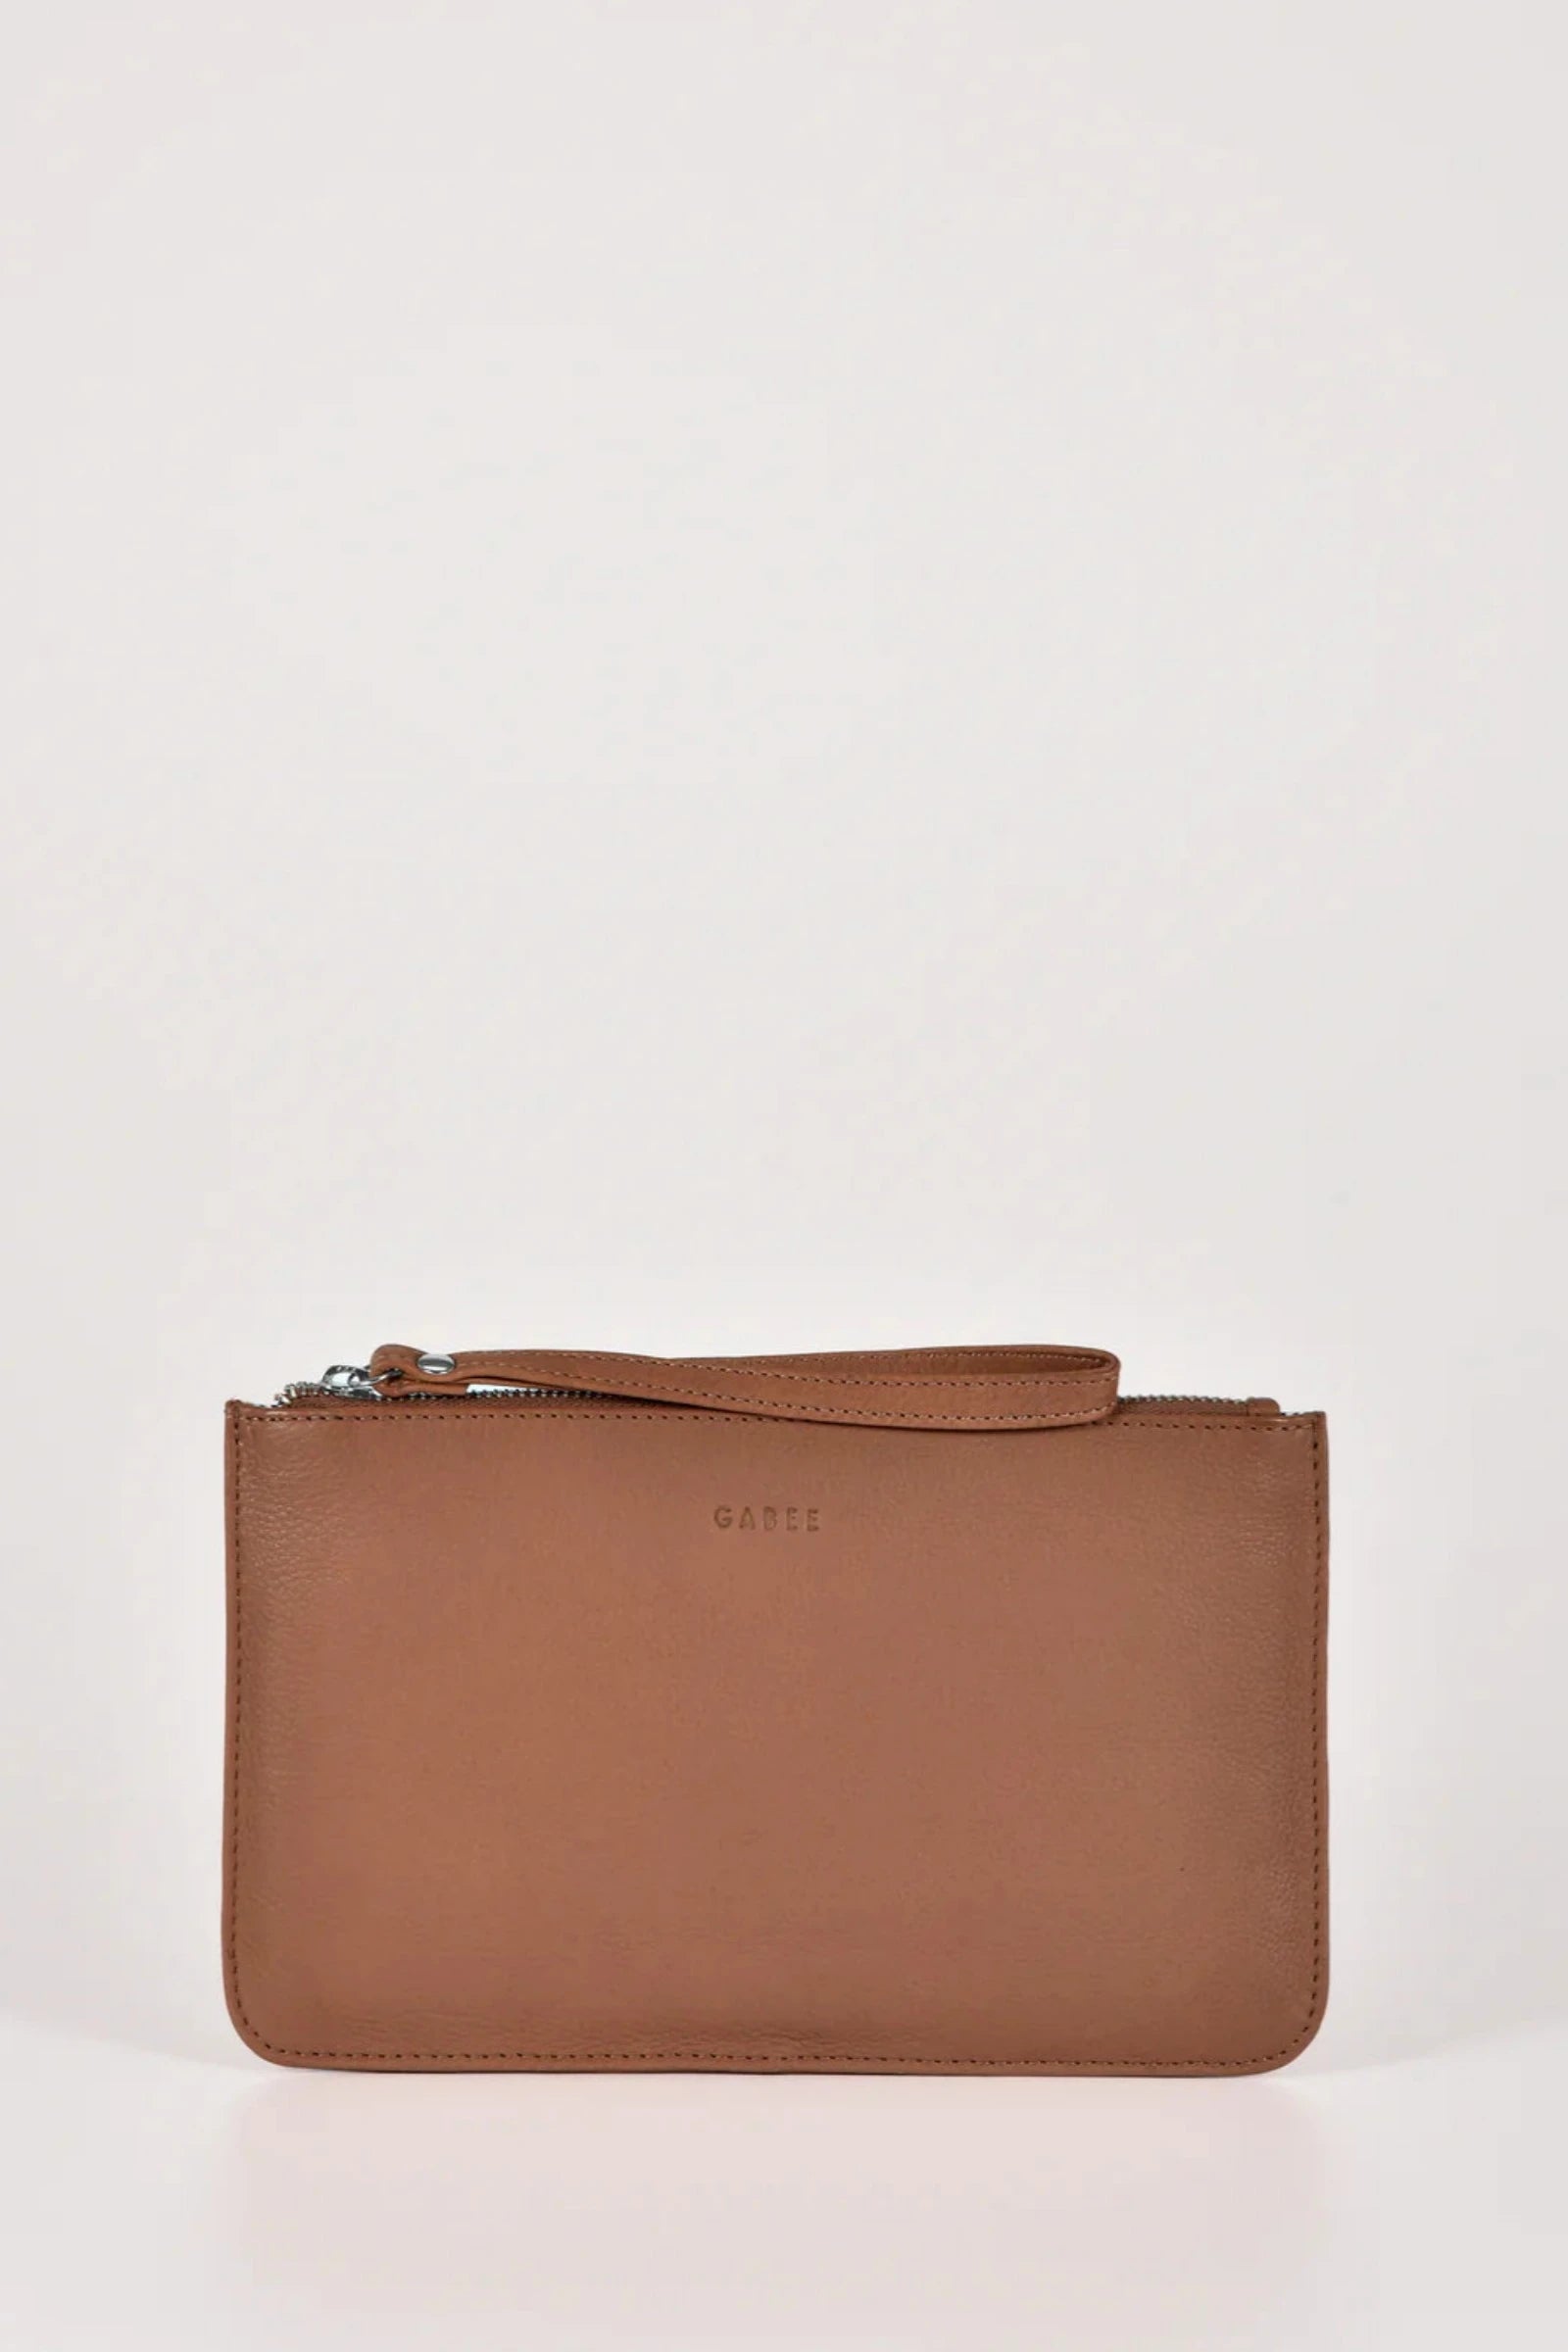 Gabee Mercer Leather Purse Taupe